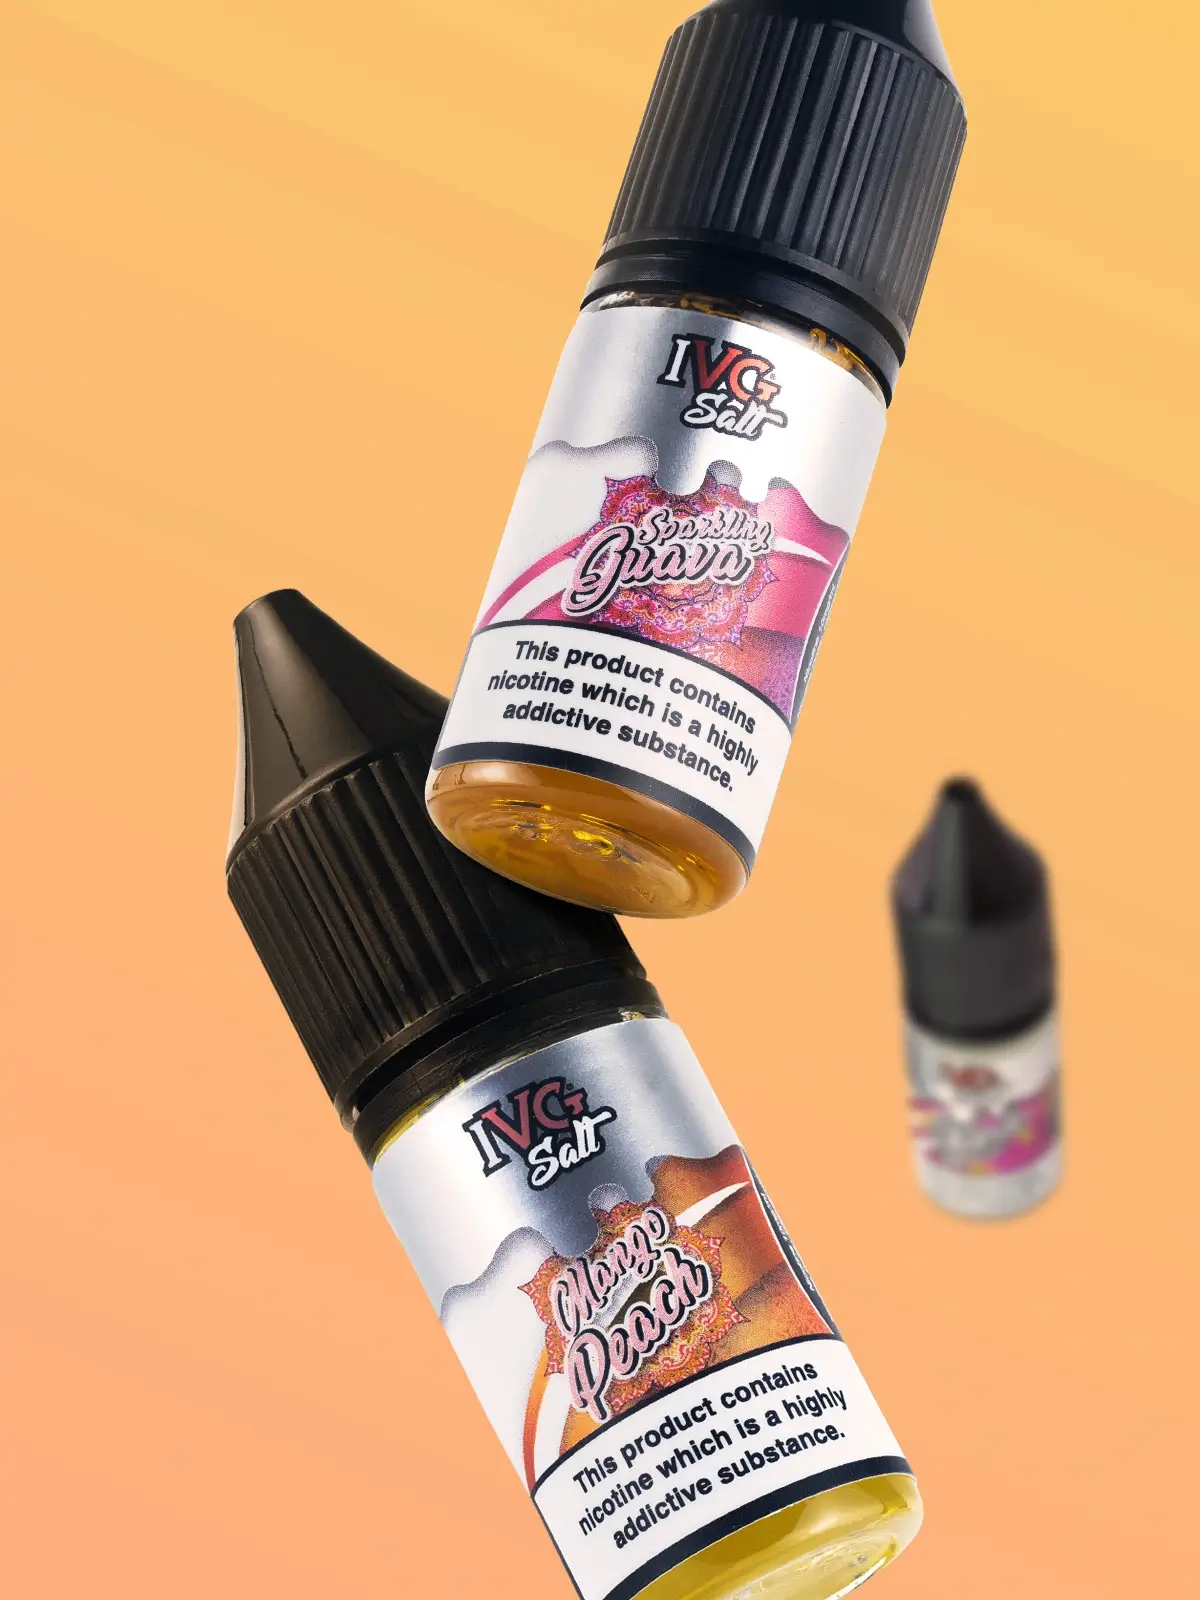 Three bottles of IVG e-liquid (one out of focus) featuring Sparkling Guava and Mango Peach flavours